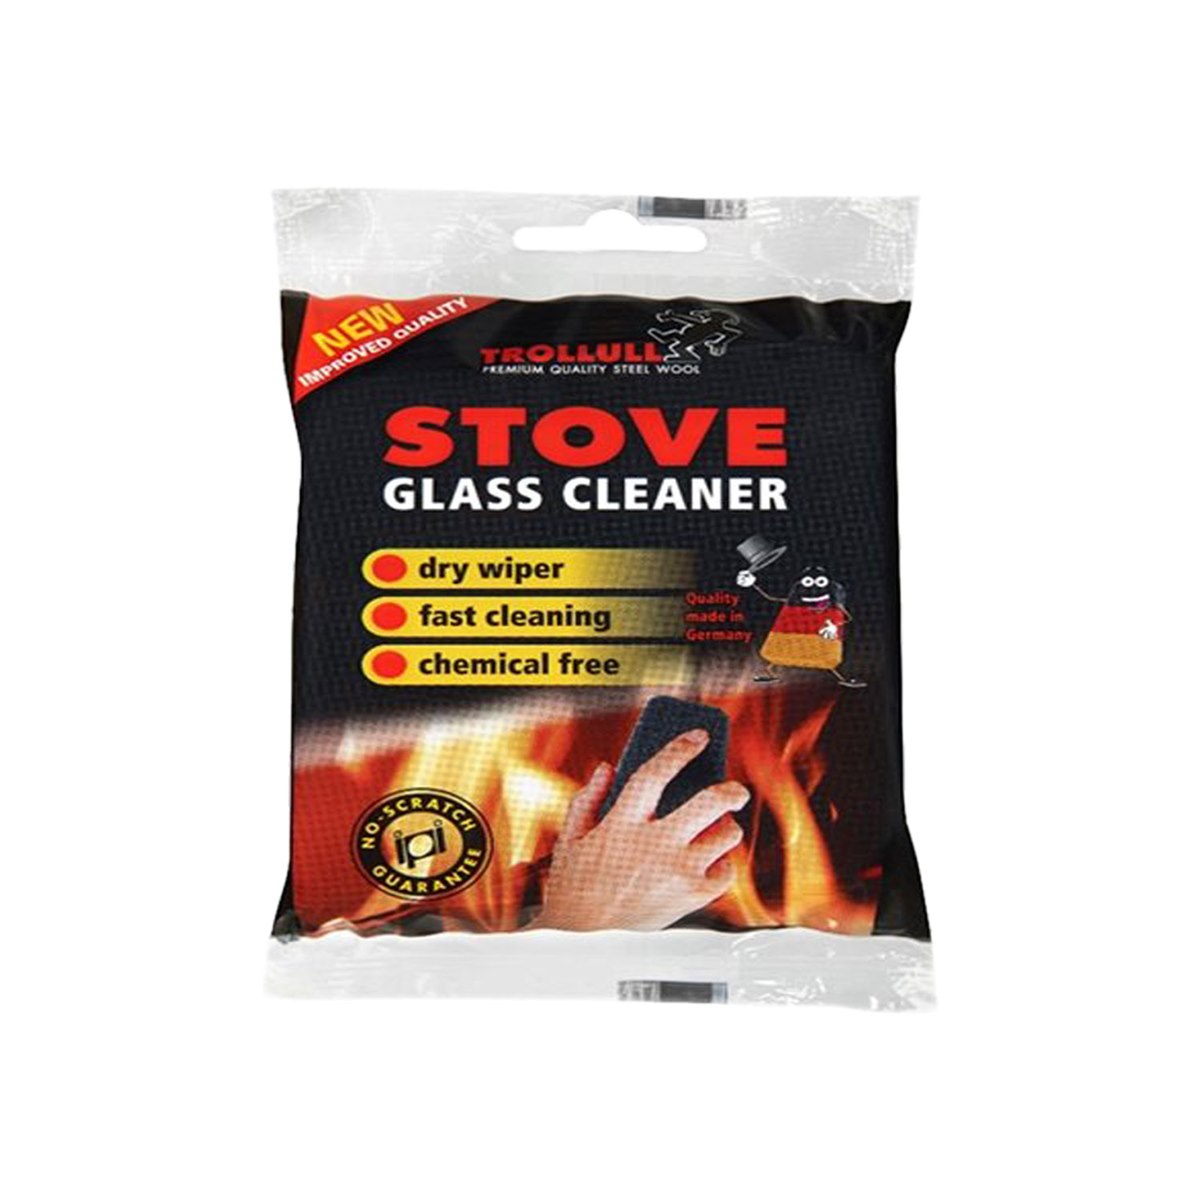 Trollull Stove Glass Cleaner Pads 2 Pack